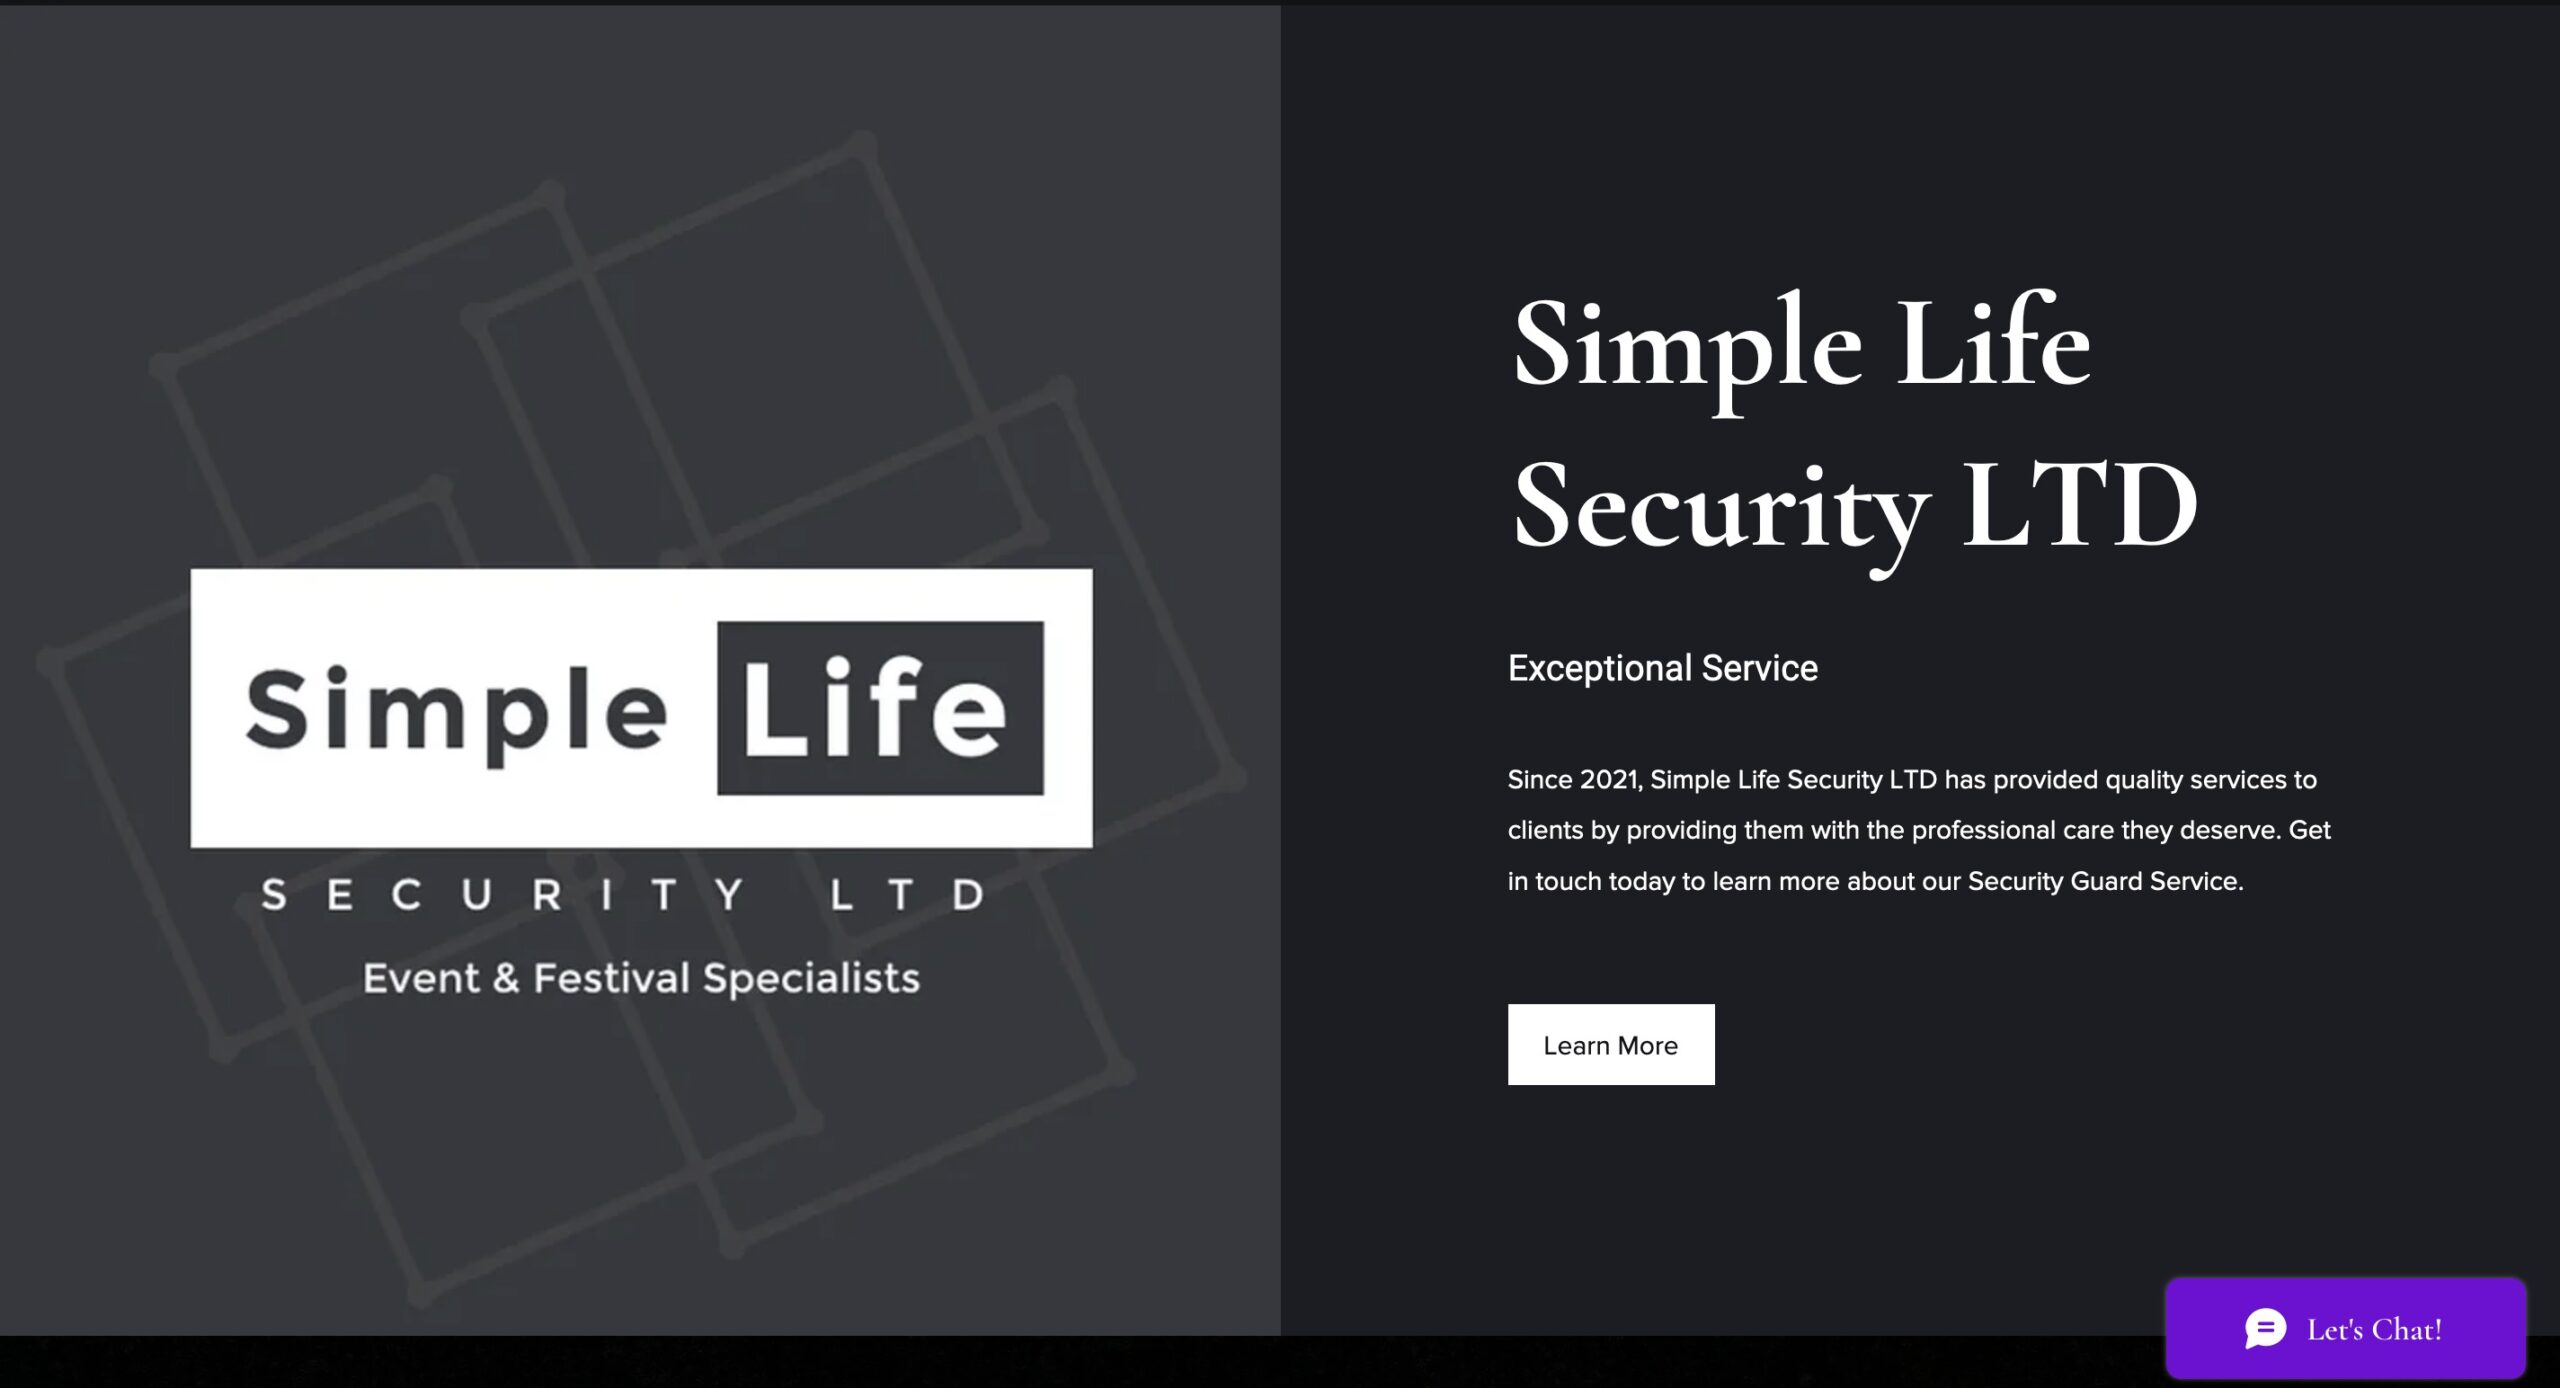 simplelifesecurity.co.uk